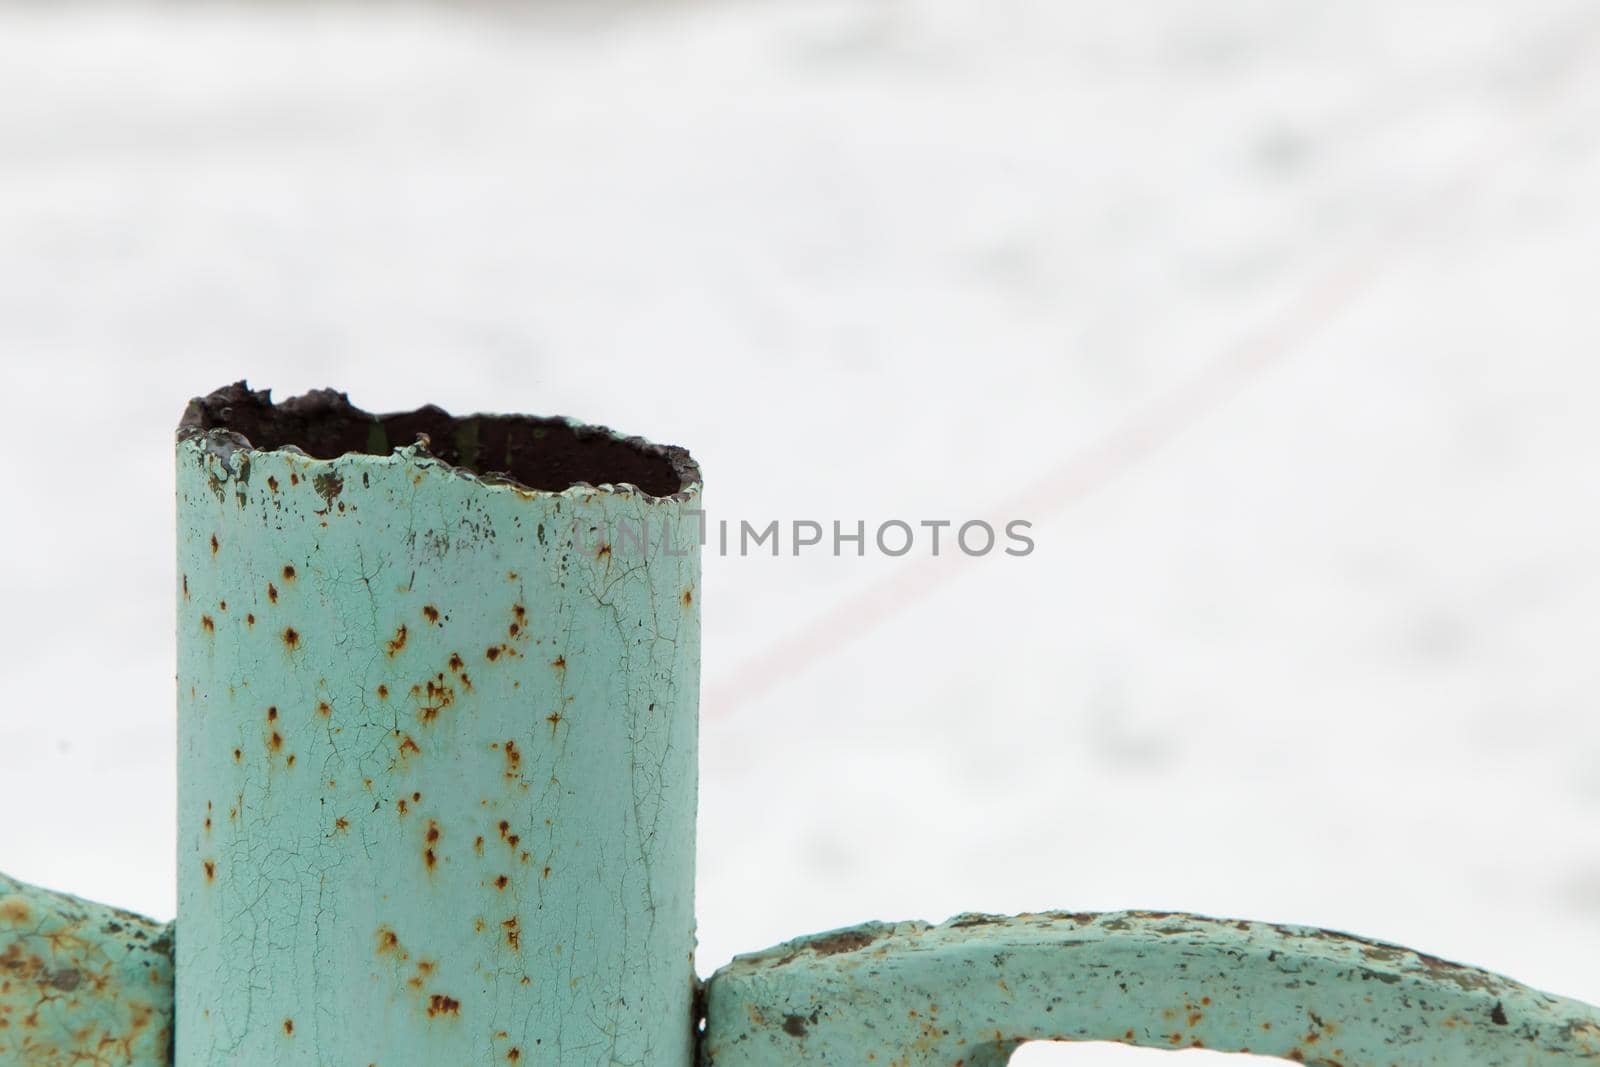 A rusty metal pipe sticks out over an iron fence. The top cut is uneven with very sharp and dangerous edges. Against the background of white snow.